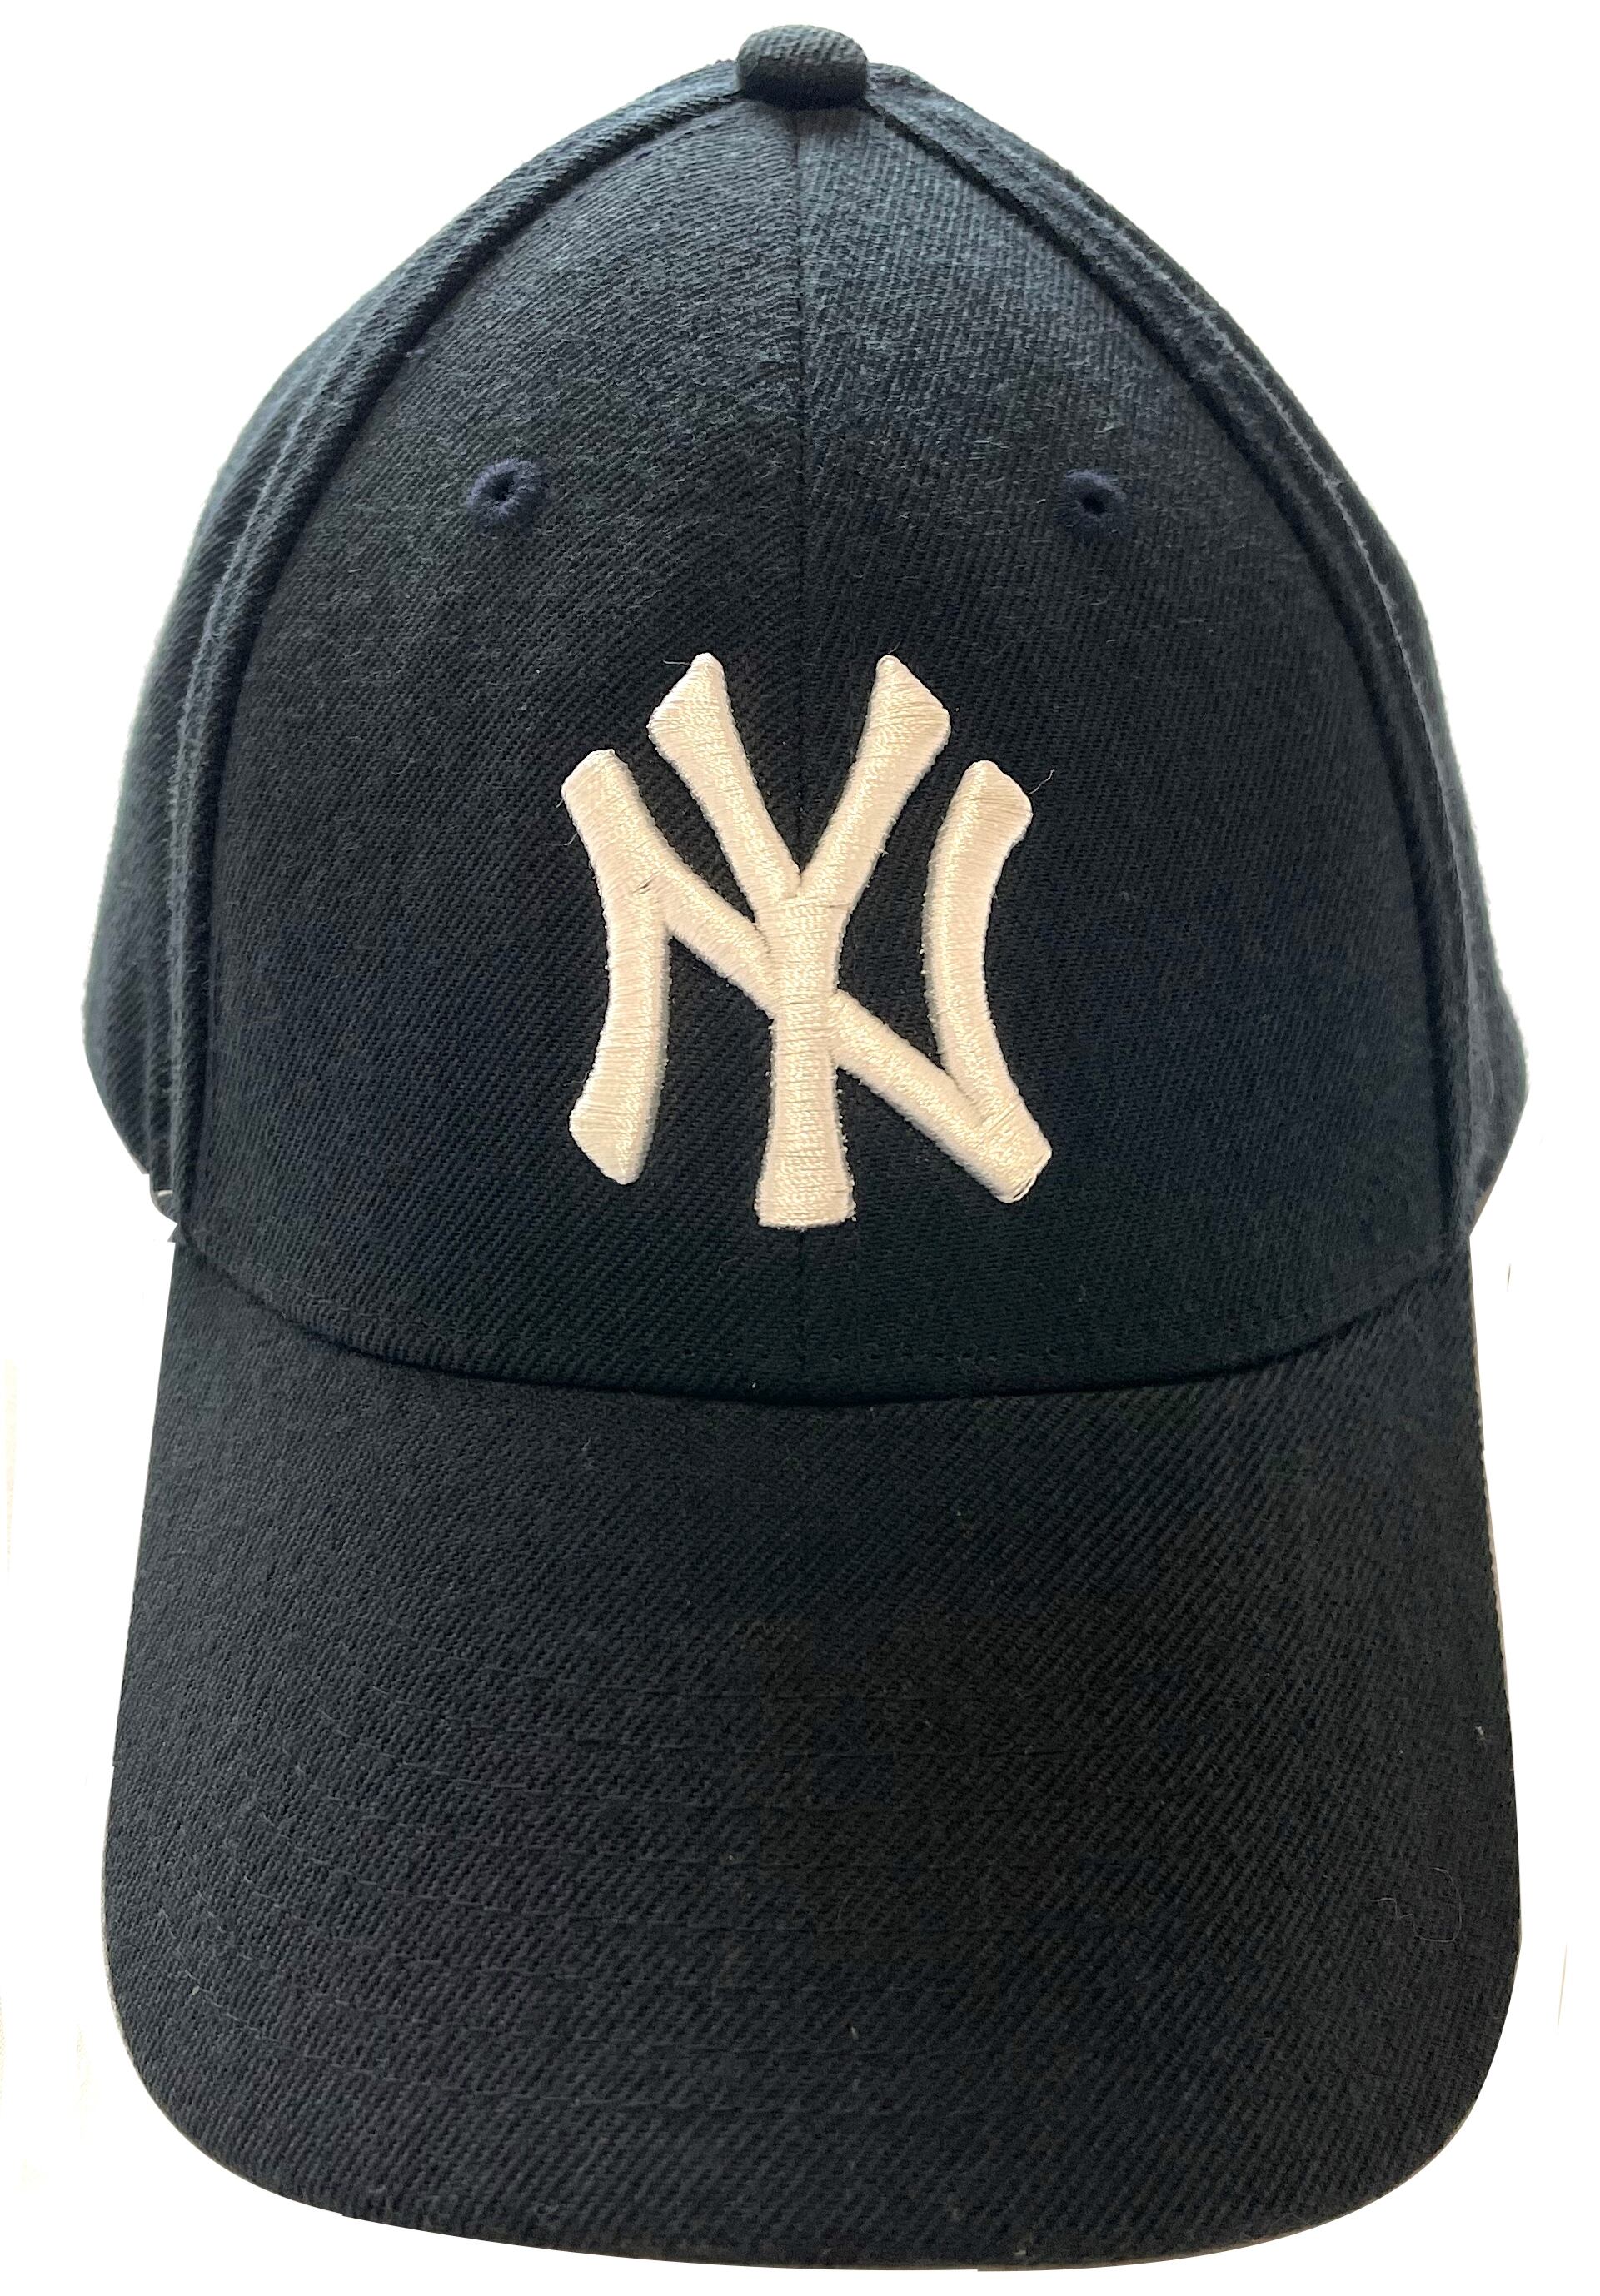 Yankees Official x Nike Cap [NY購入品]official